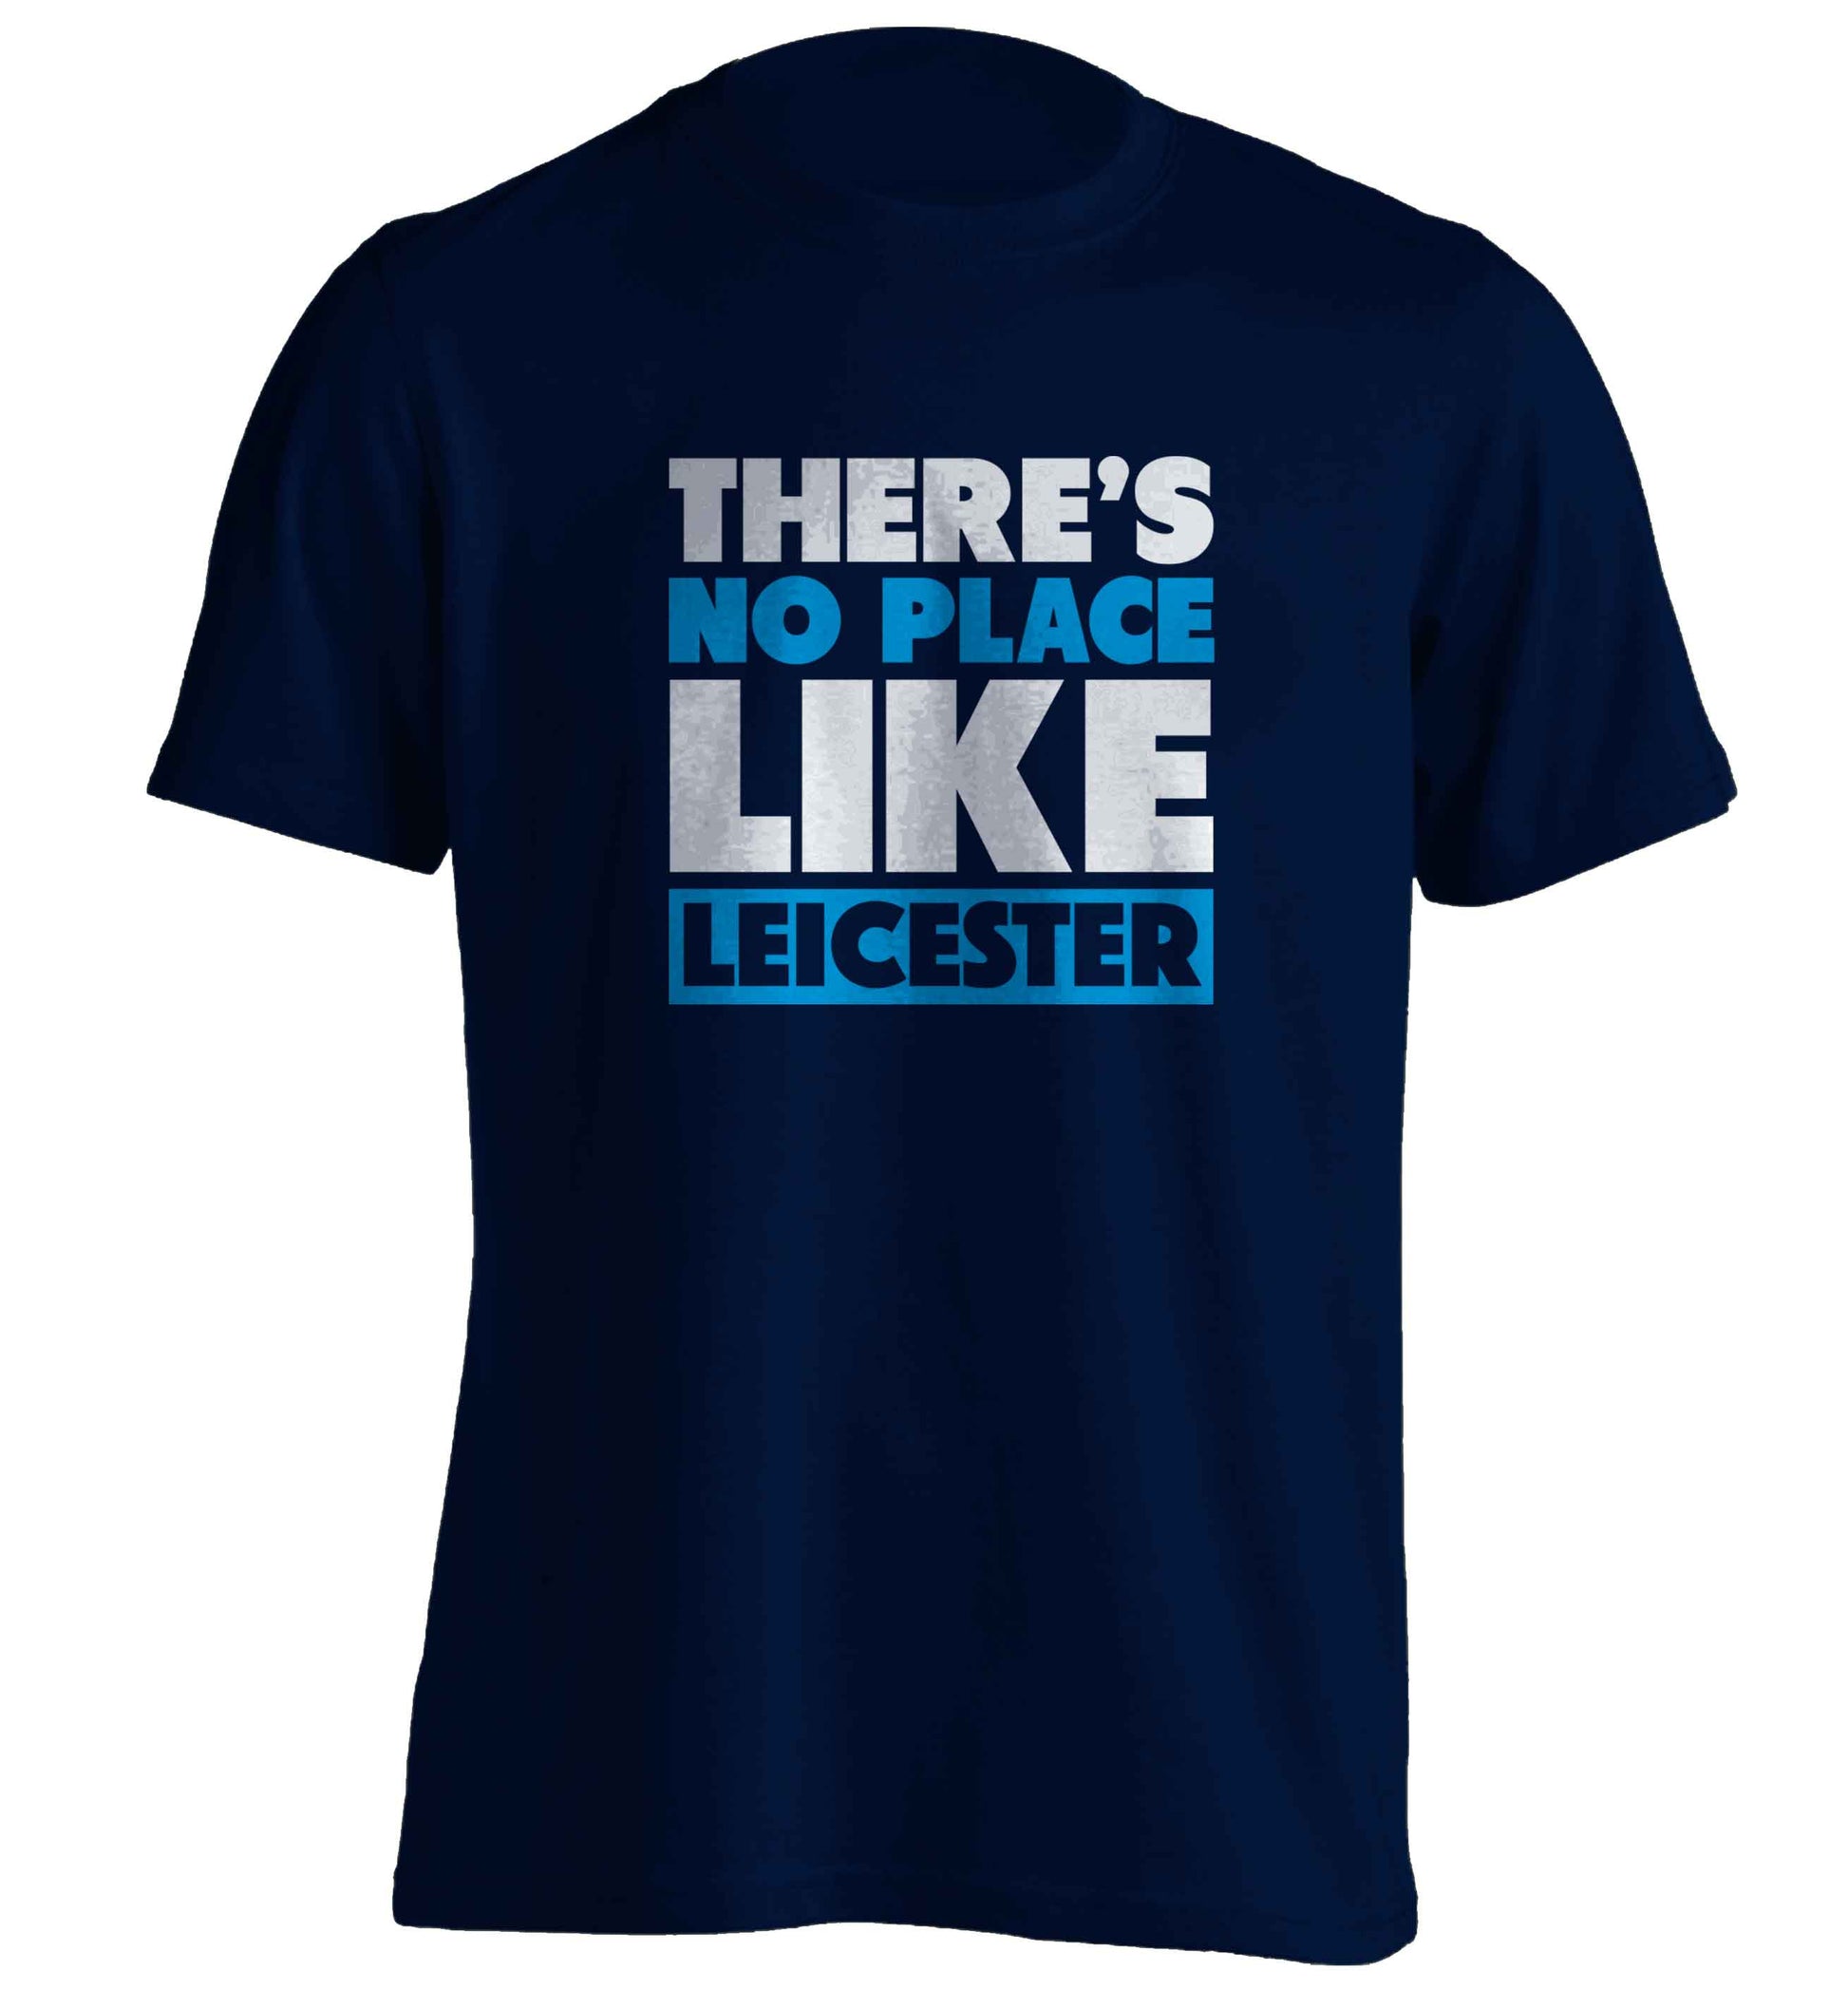 There's no place like Leicester adults unisex navy Tshirt 2XL